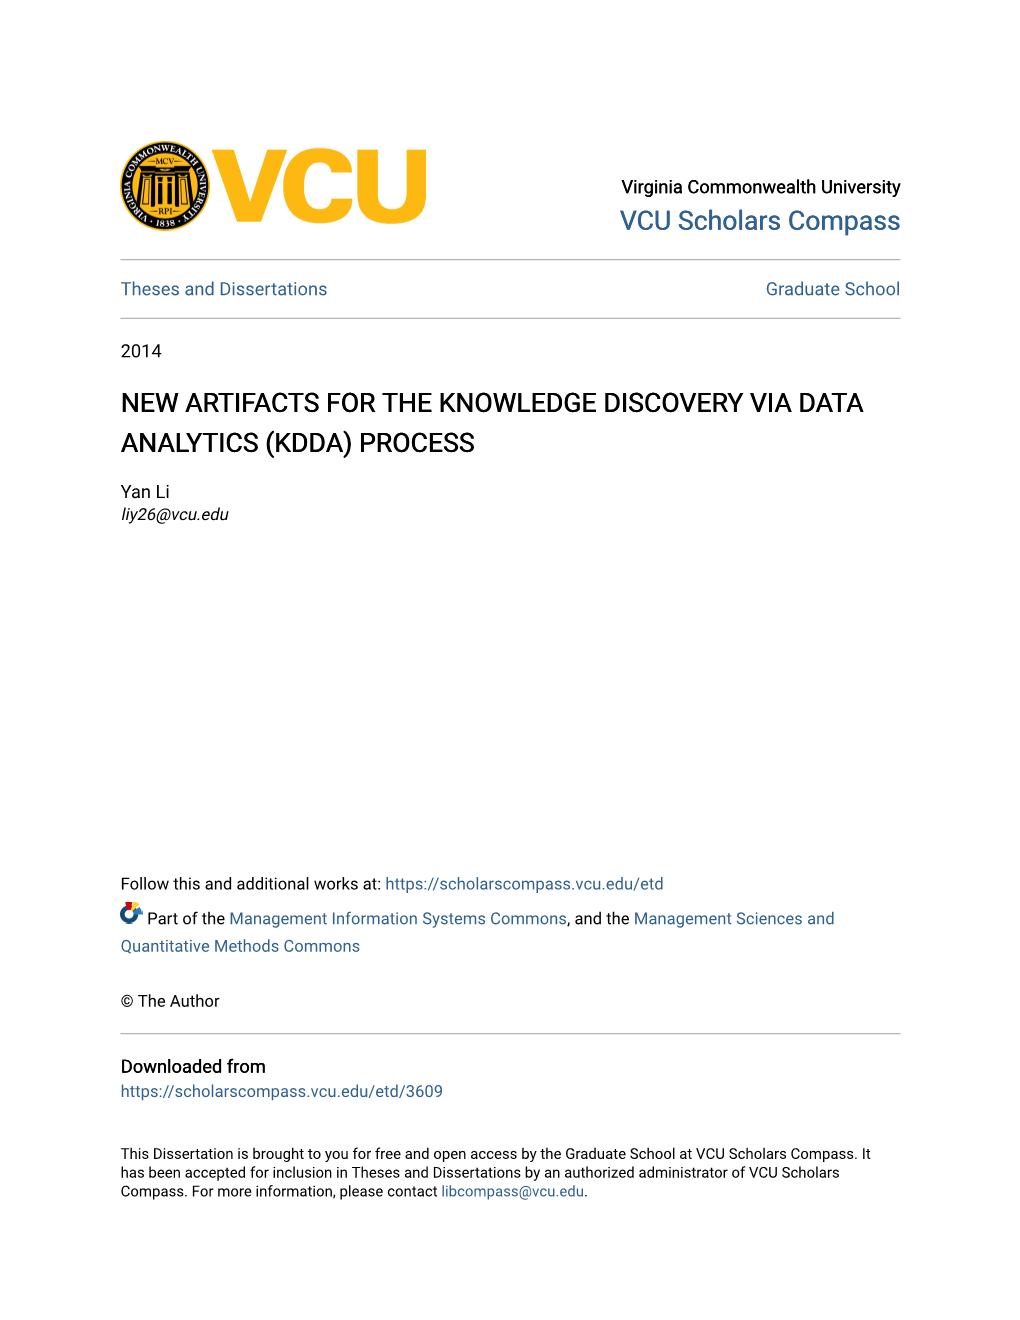 New Artifacts for the Knowledge Discovery Via Data Analytics (Kdda) Process